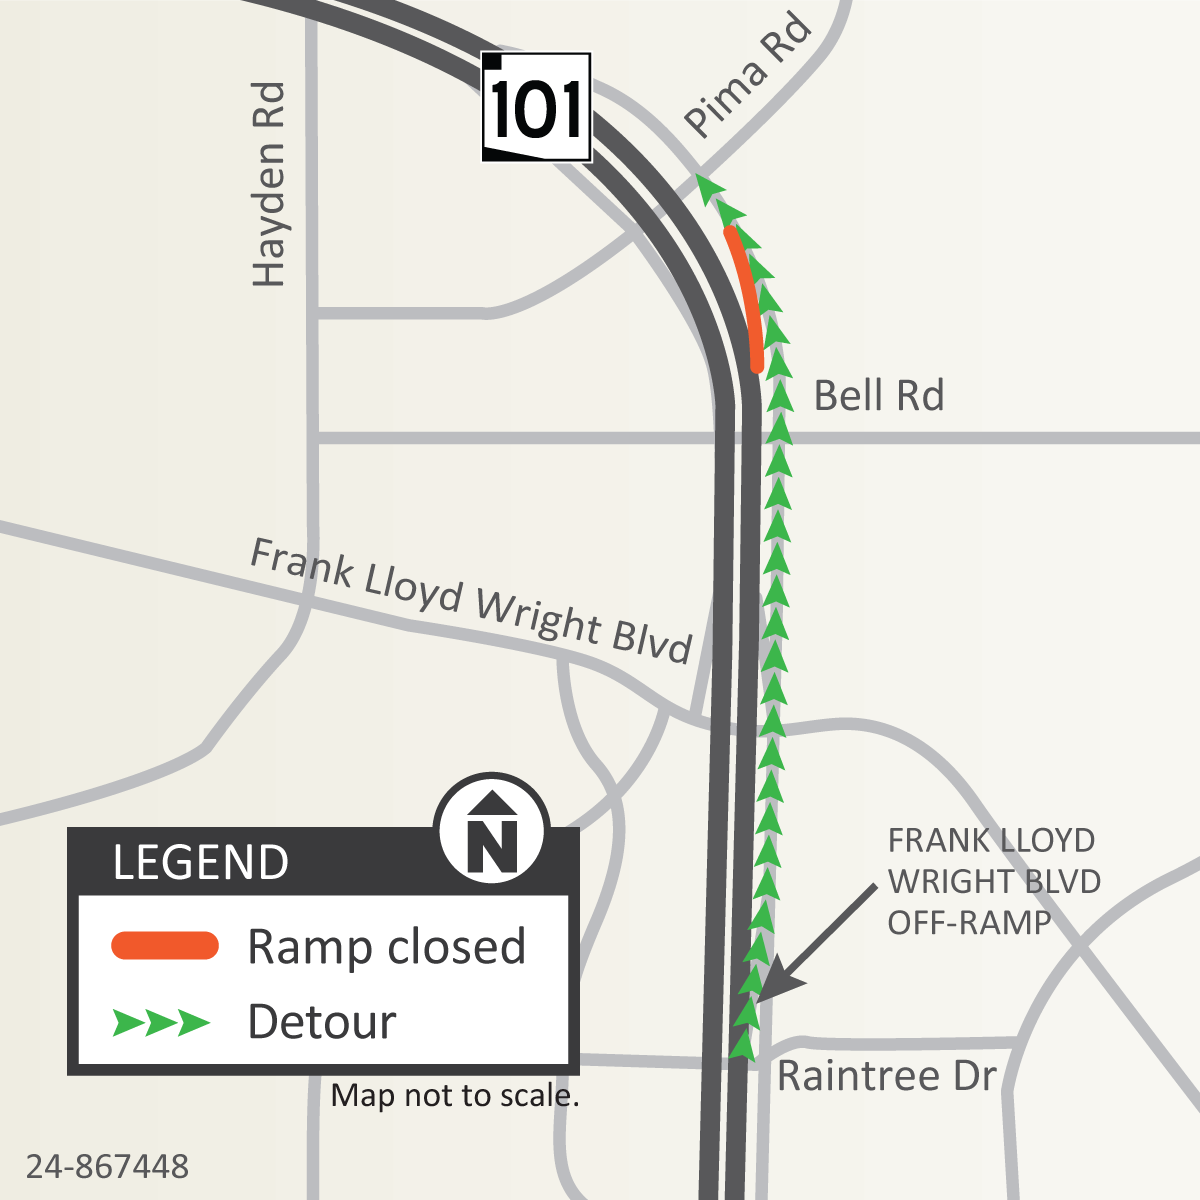 Map showing the ramp closure and recommended detour.